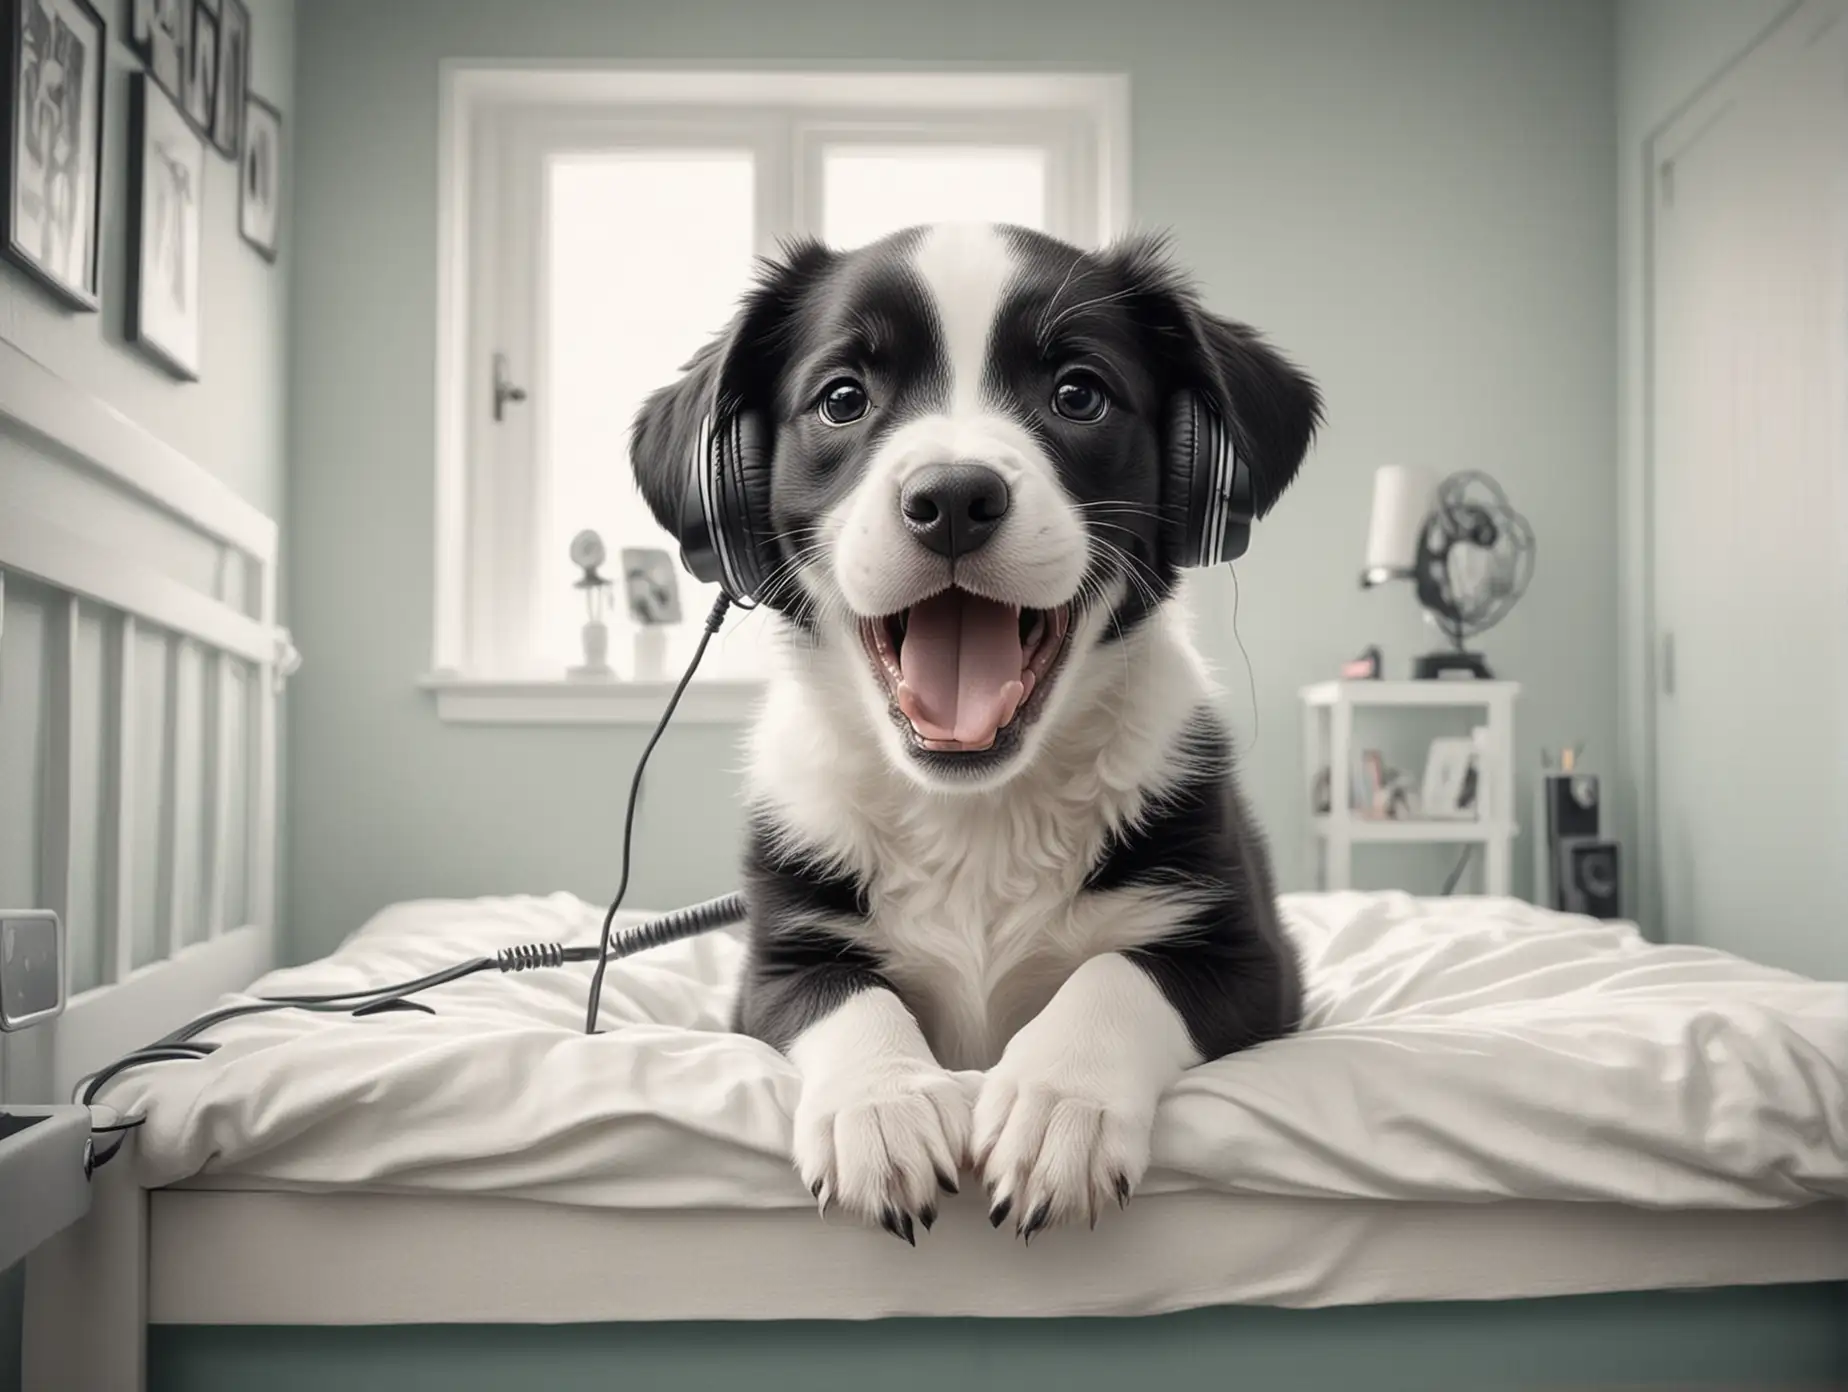 Adorable Black and White Puppy in Teenagers Bedroom Listening to Headphones